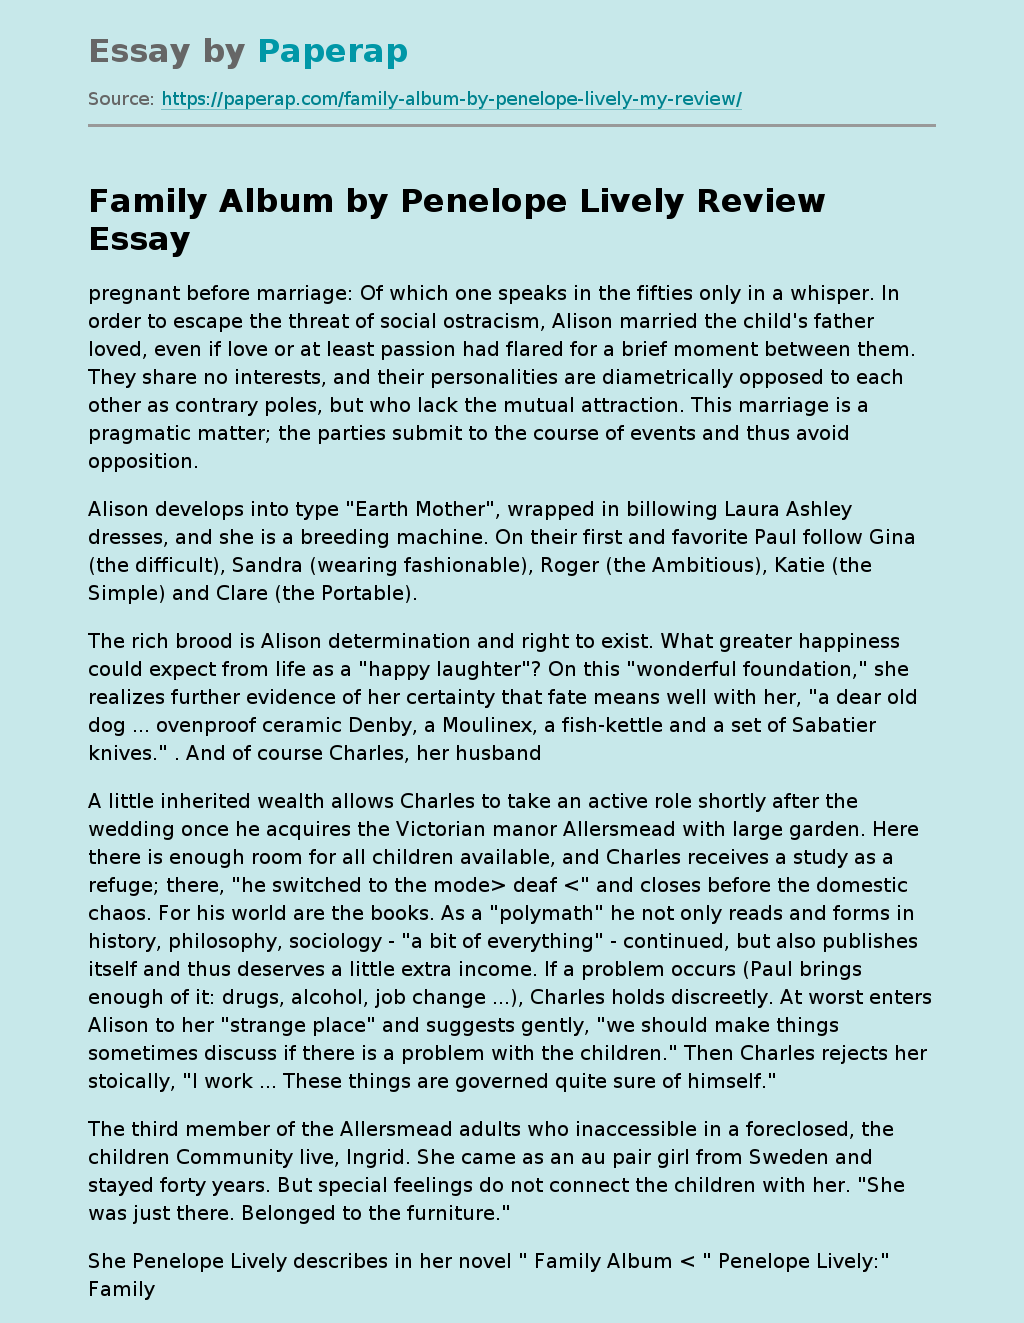 "Family Album" by Penelope Lively